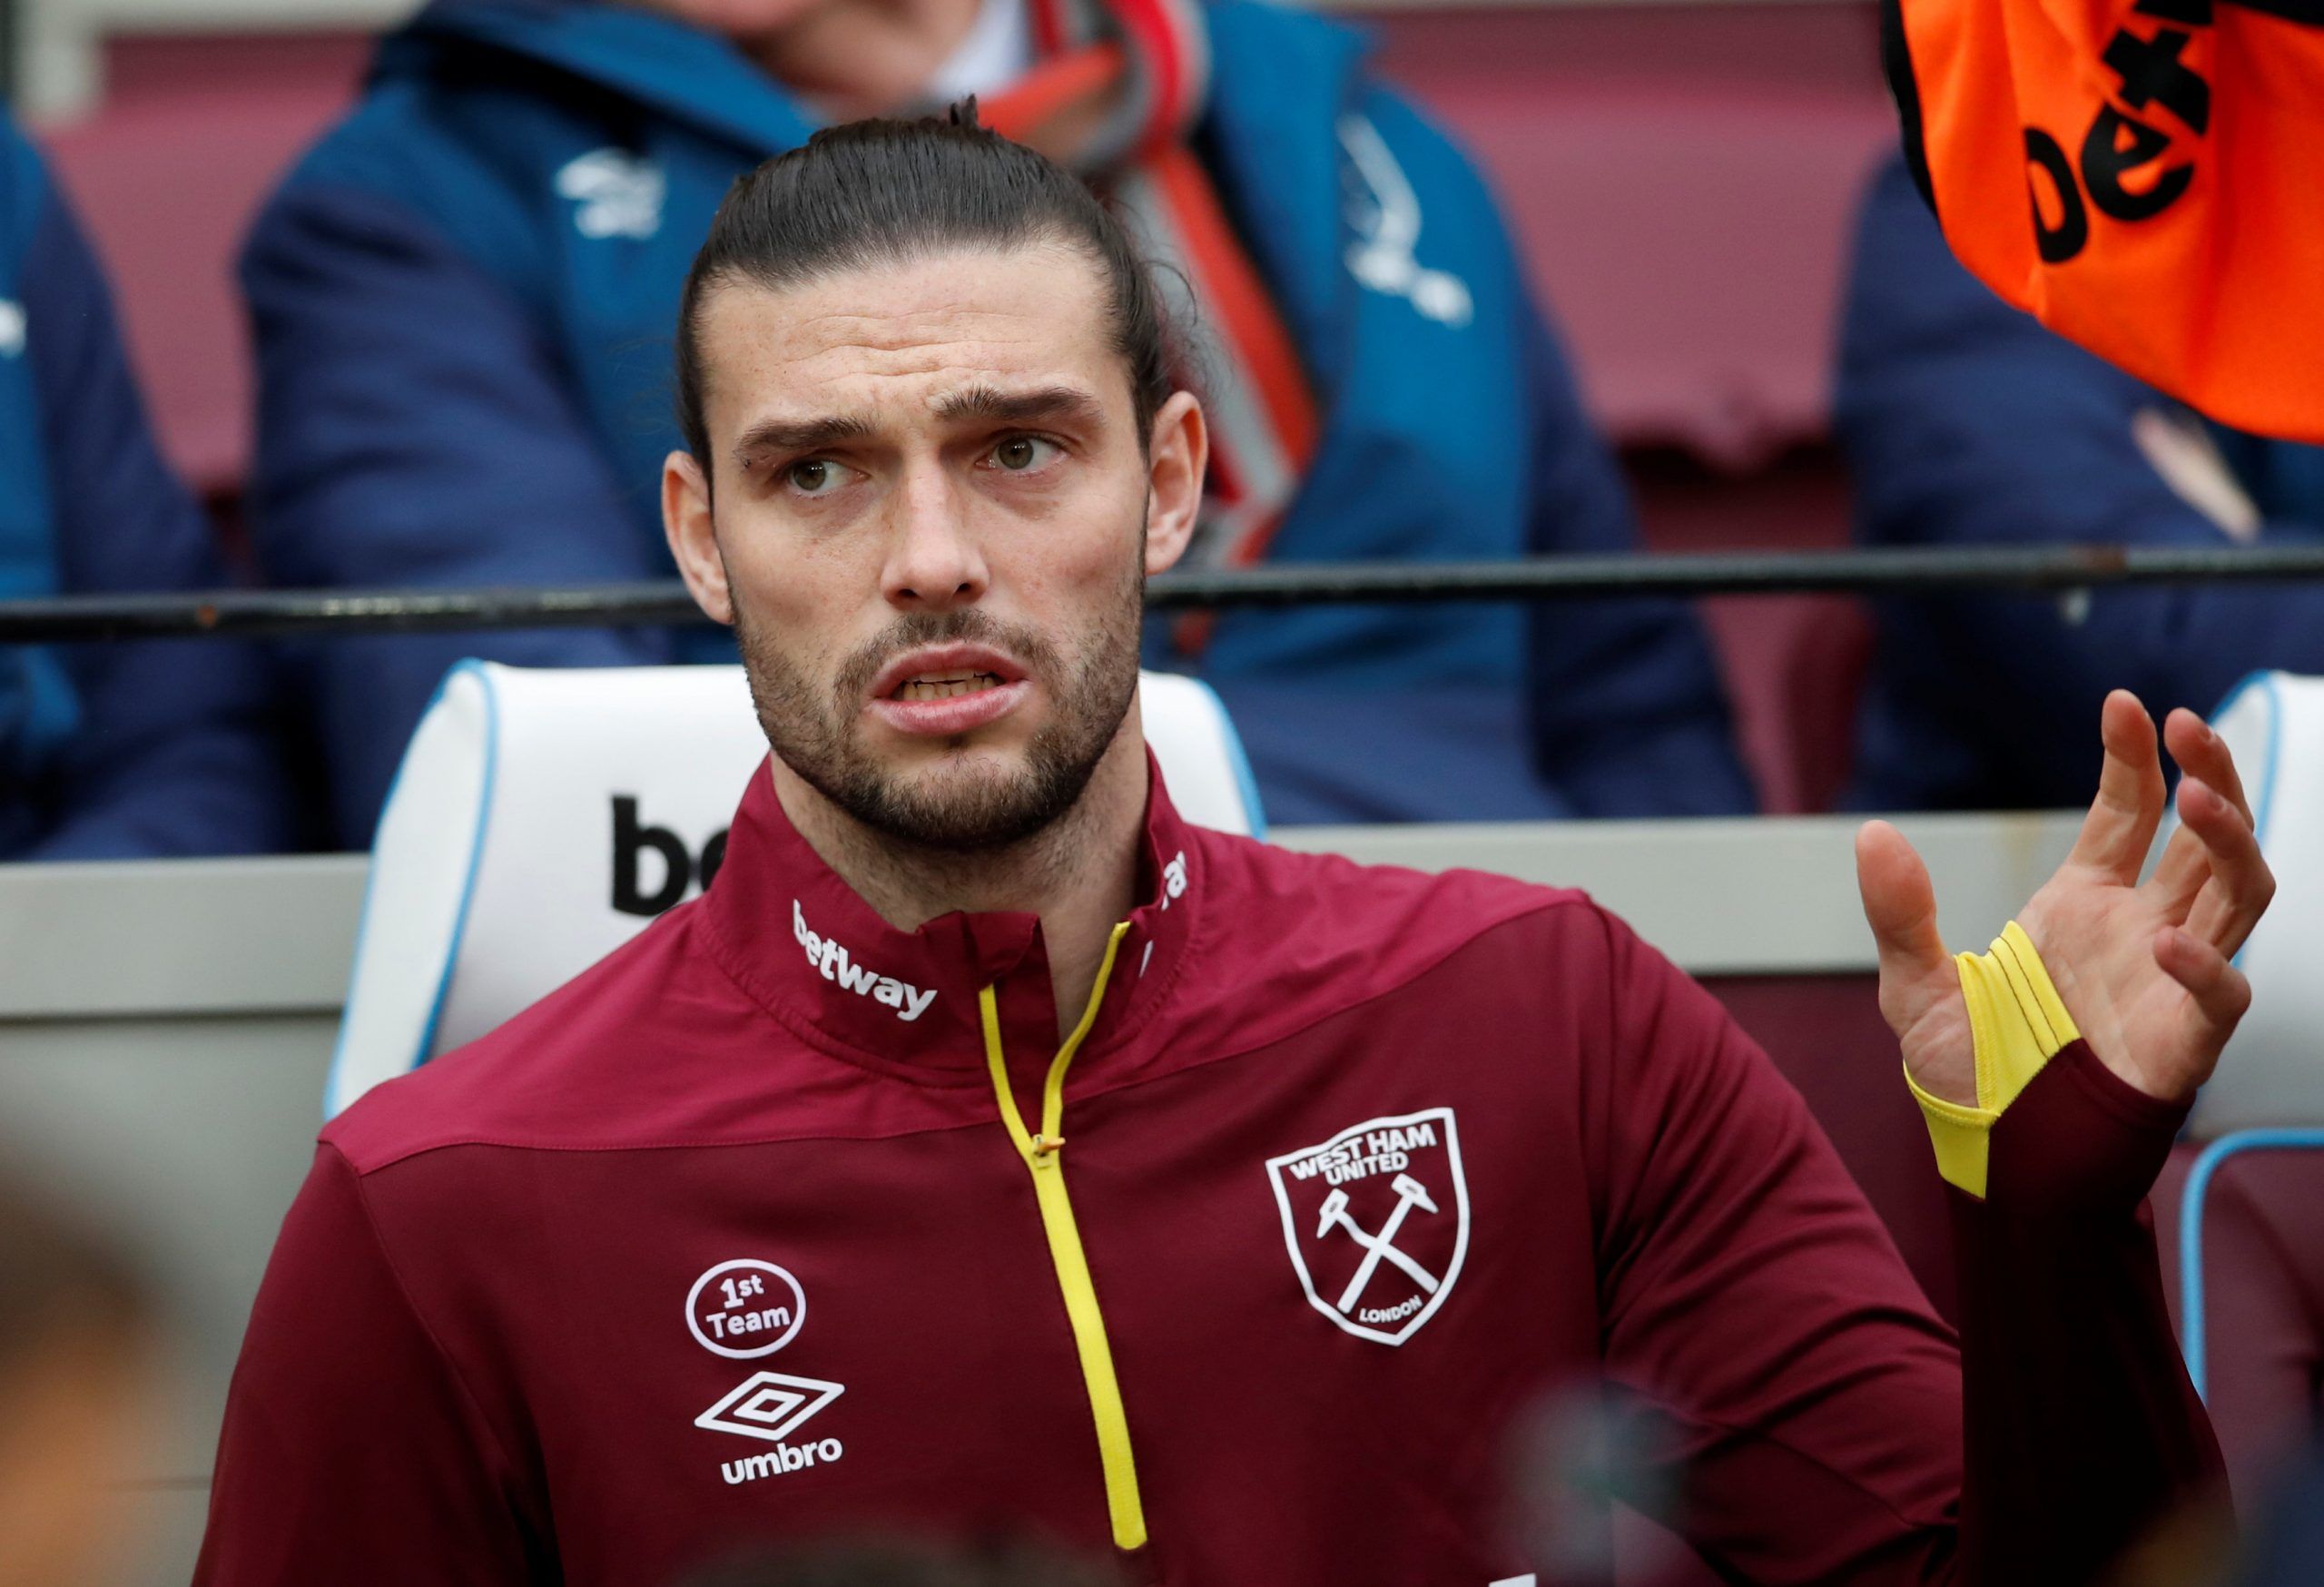 Soccer Football - Premier League - West Ham United v Arsenal - London Stadium, London, Britain - January 12, 2019  West Ham's Andy Carroll before the match    REUTERS/David Klein  EDITORIAL USE ONLY. No use with unauthorized audio, video, data, fixture lists, club/league logos or 